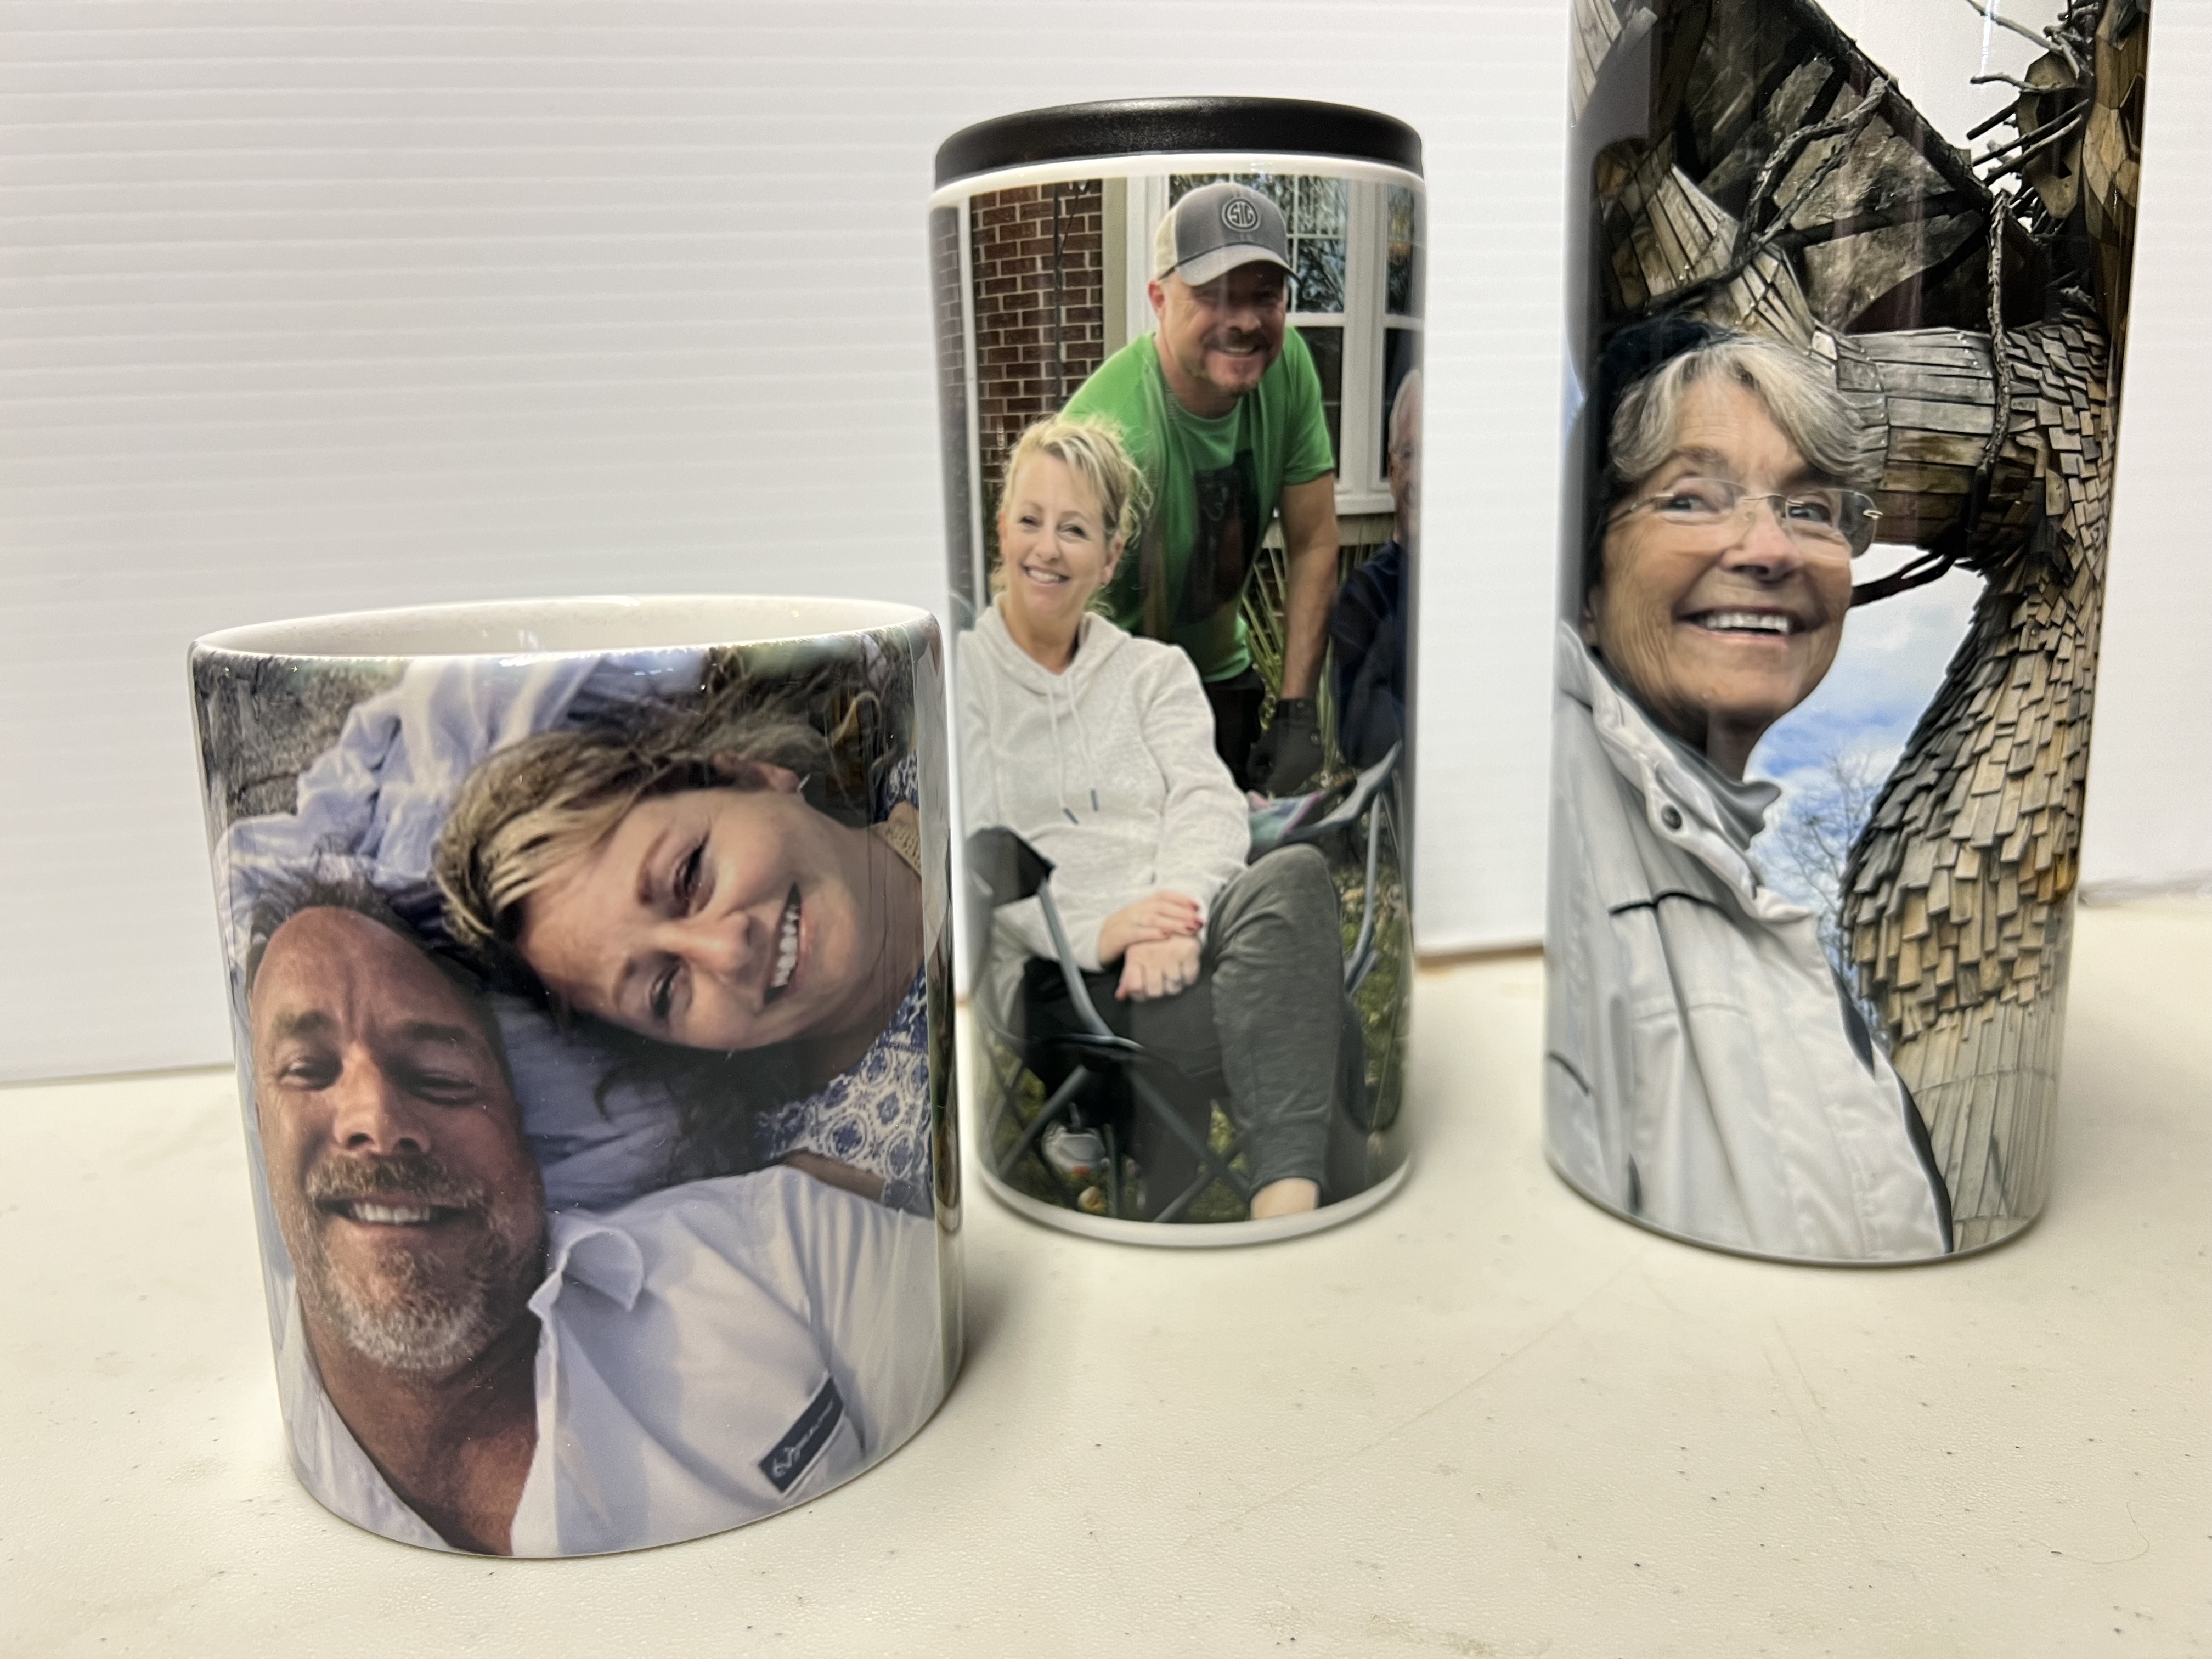 Family gifts of flask and mug with happy memories imprinted.